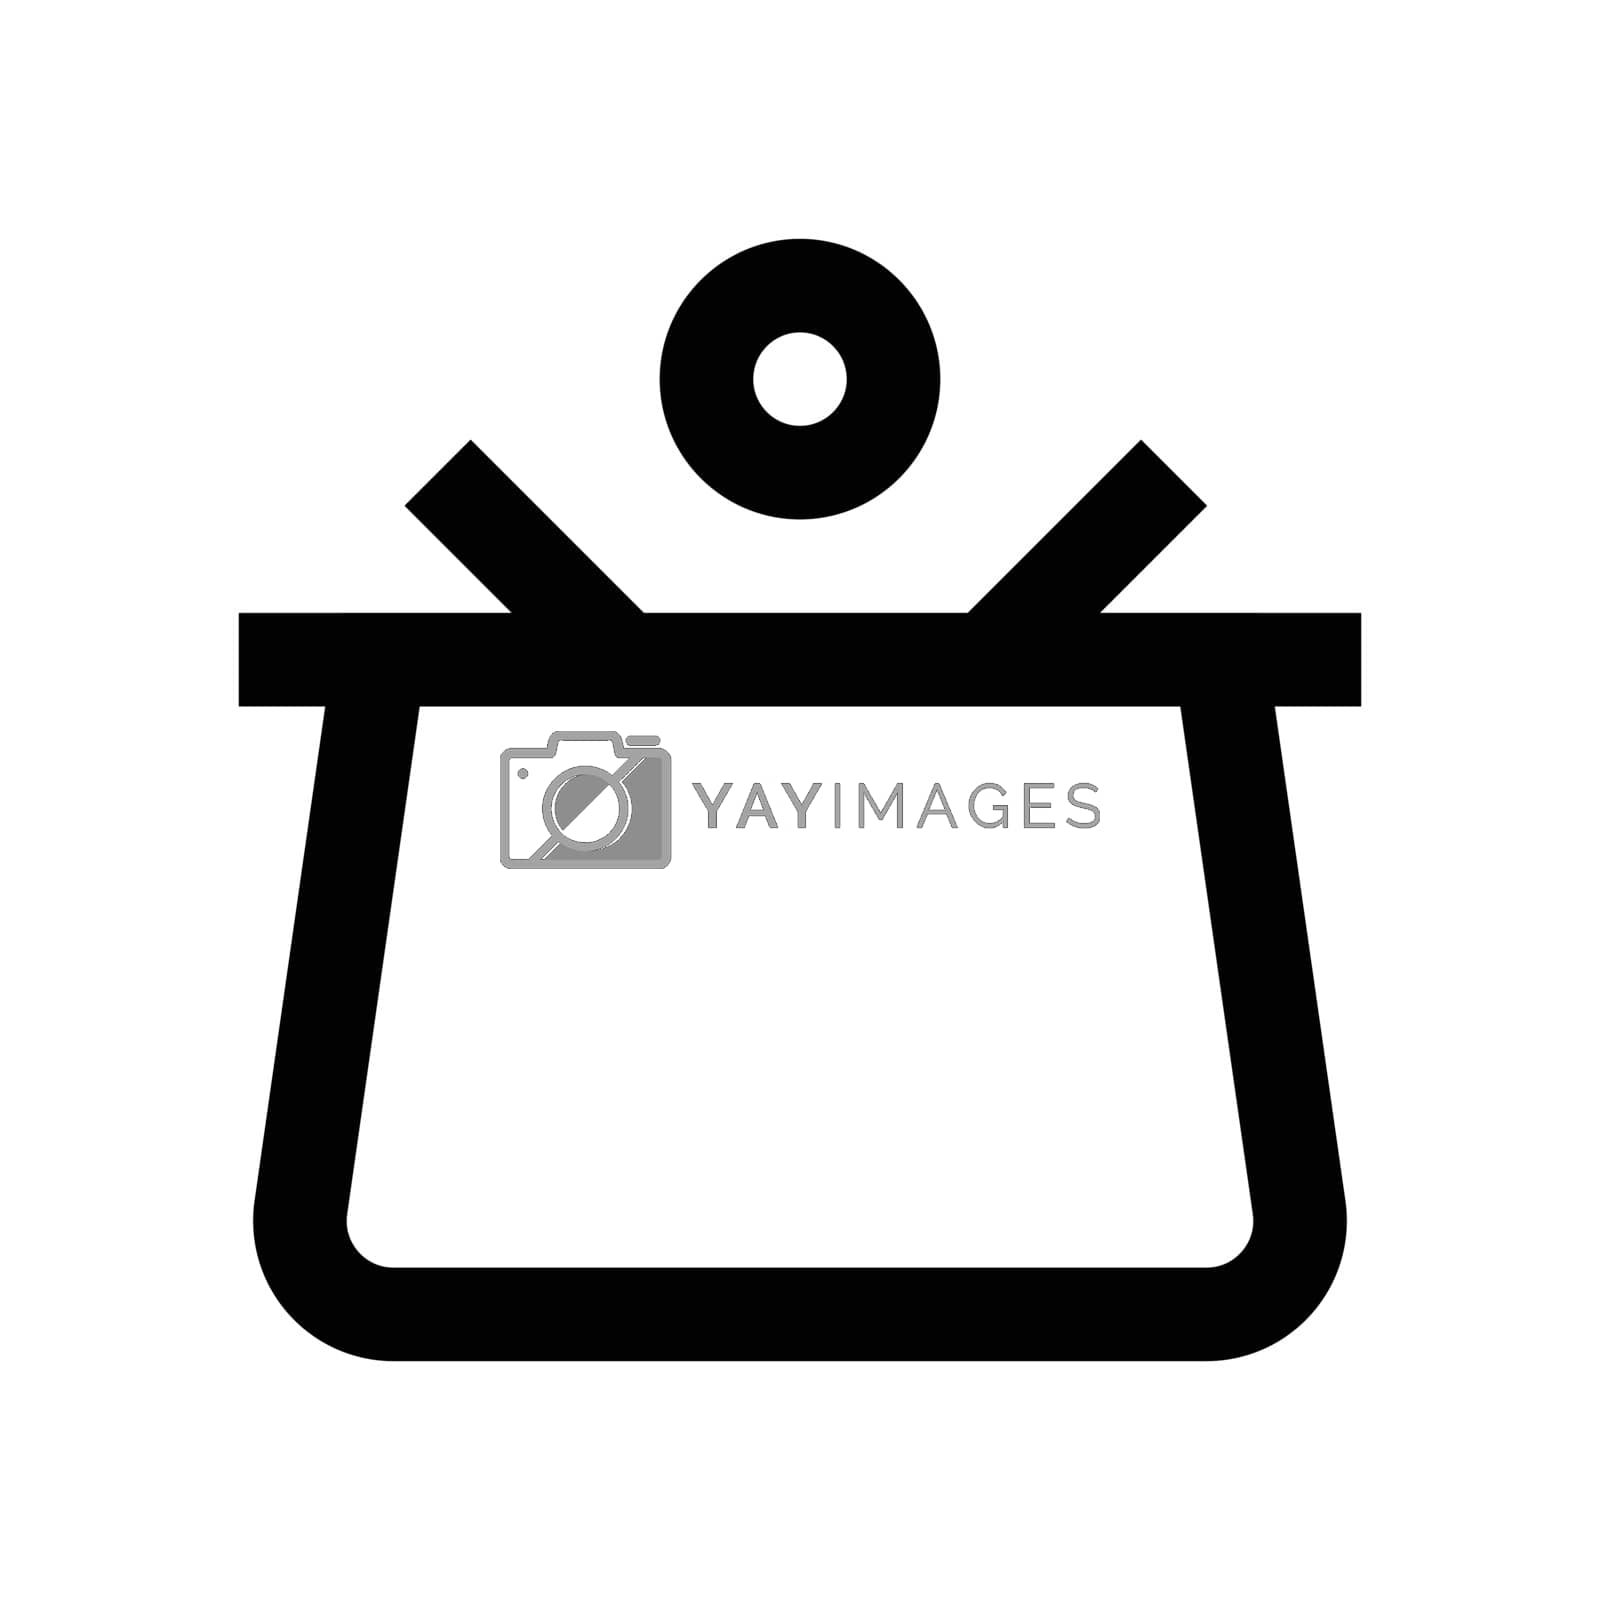 Royalty free image of cart by vectorstall